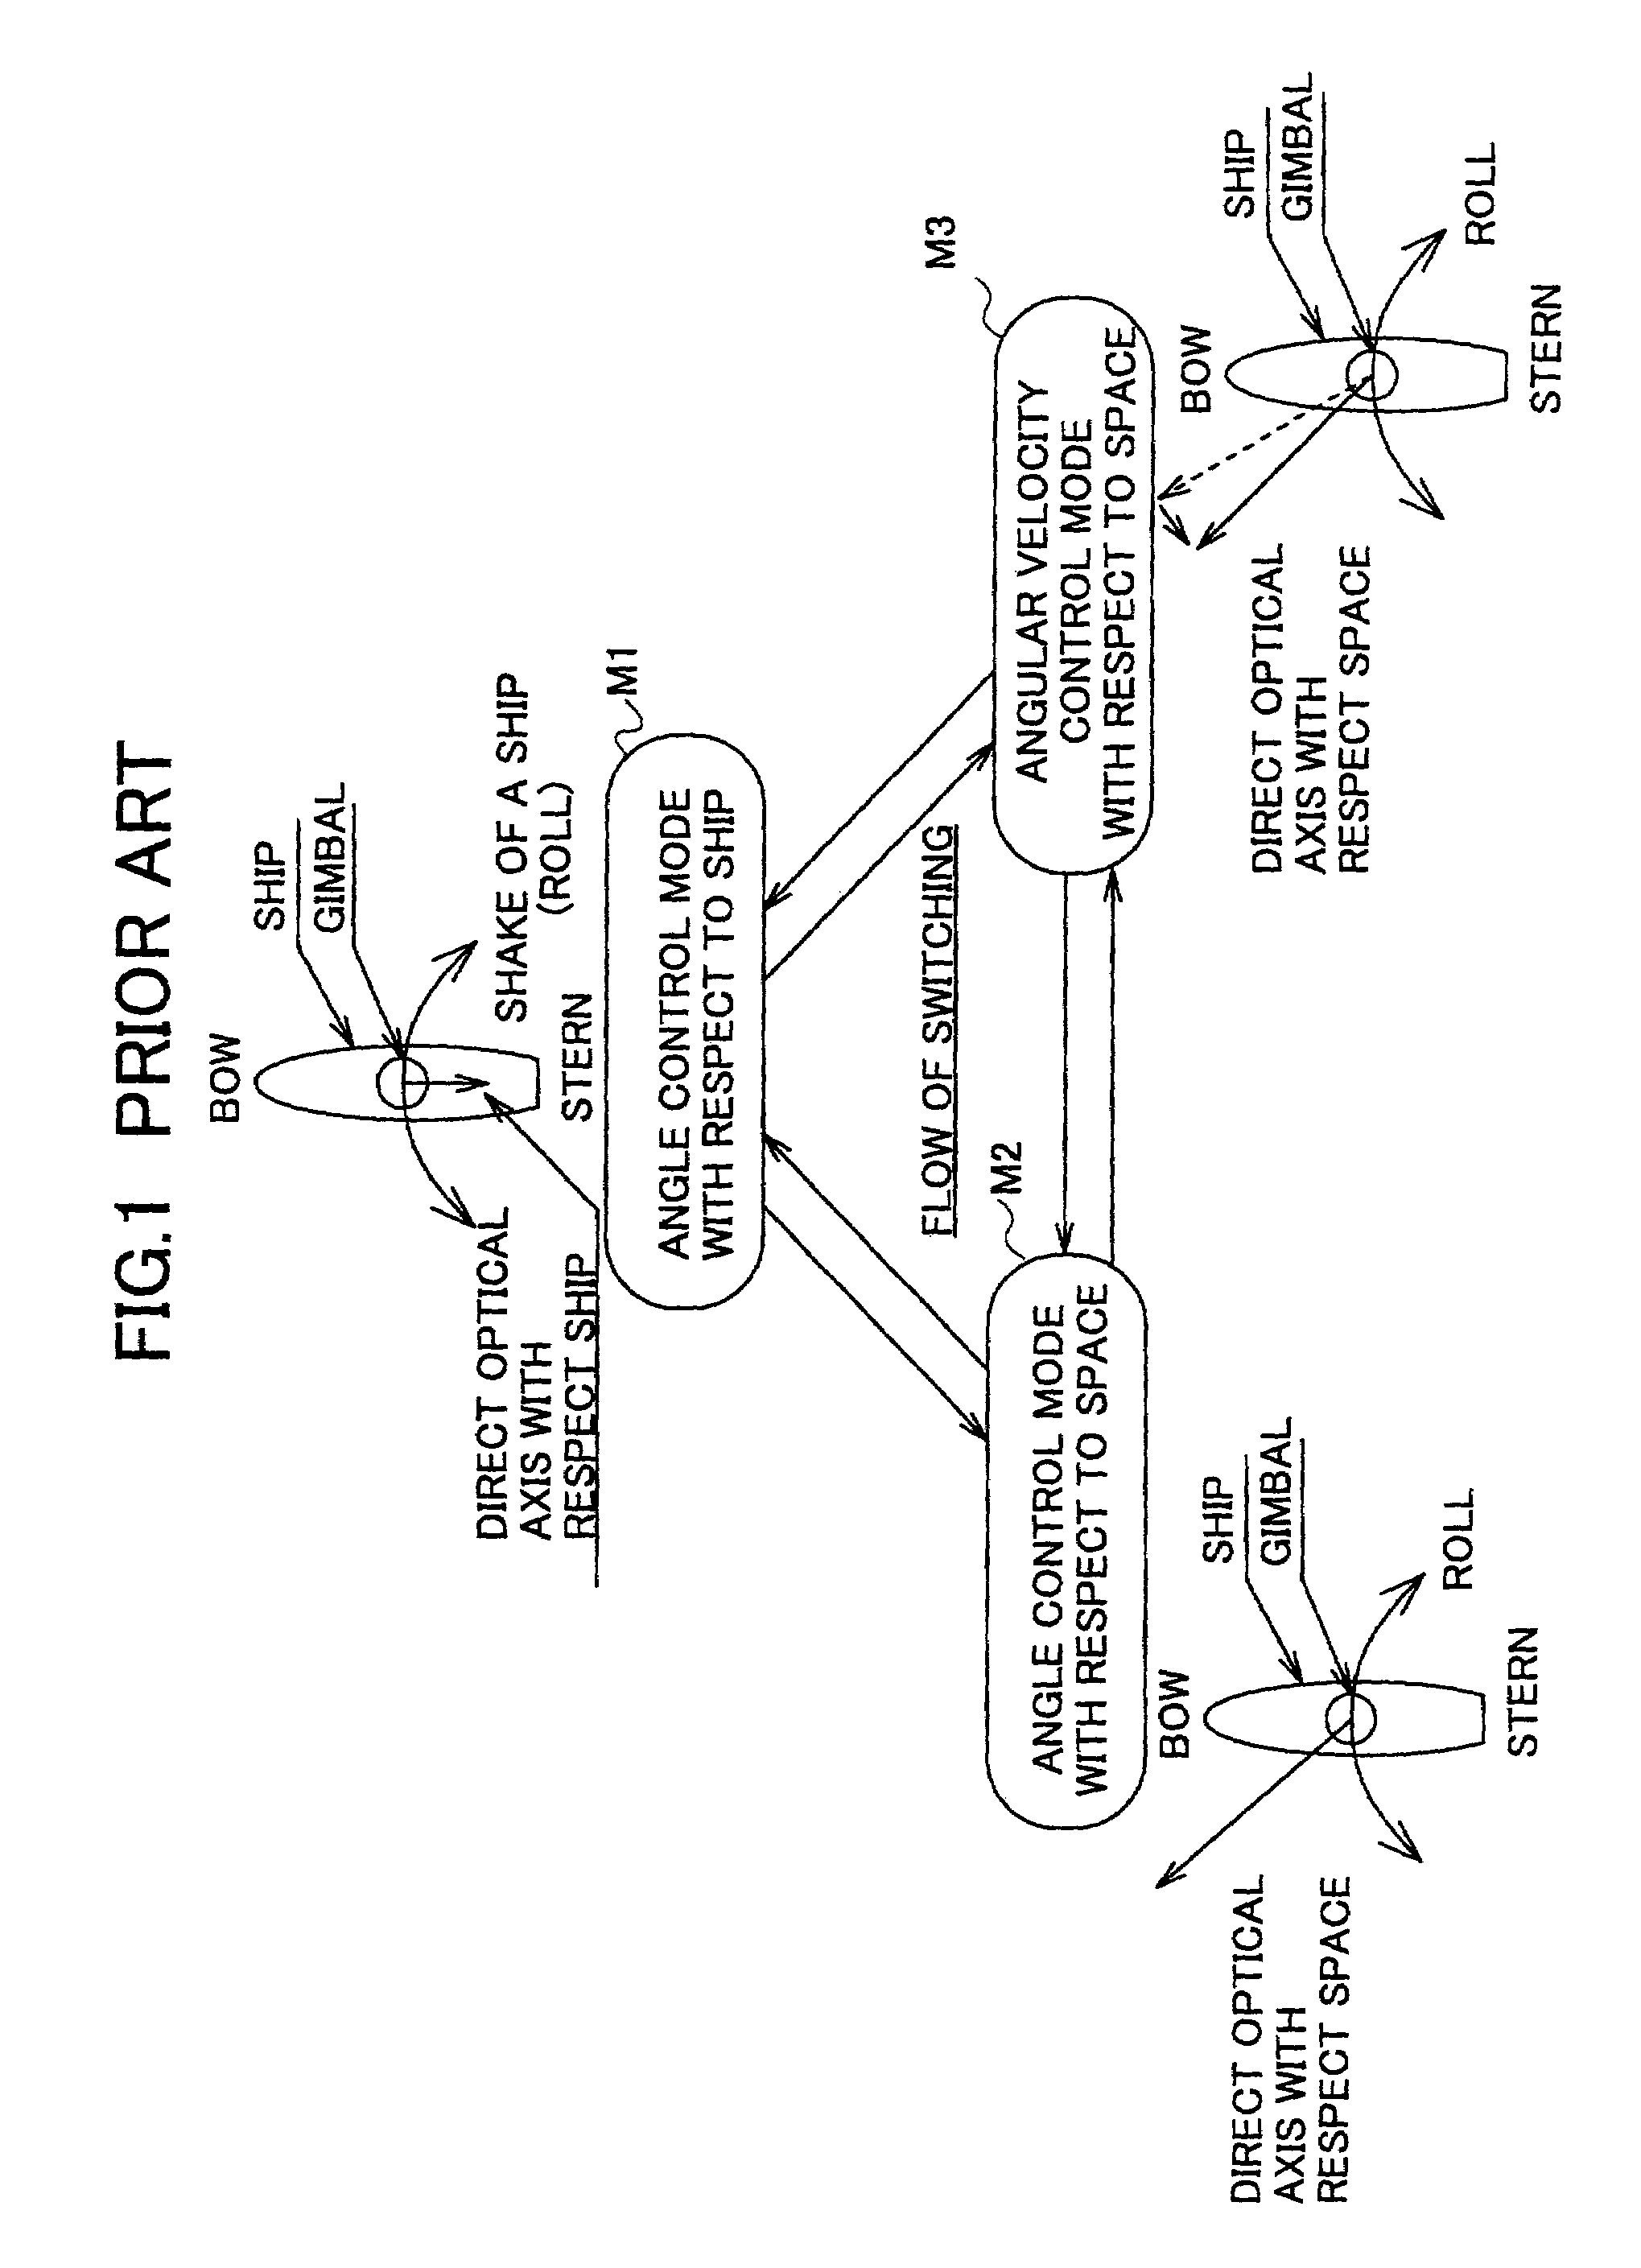 Positioning control apparatus and the method